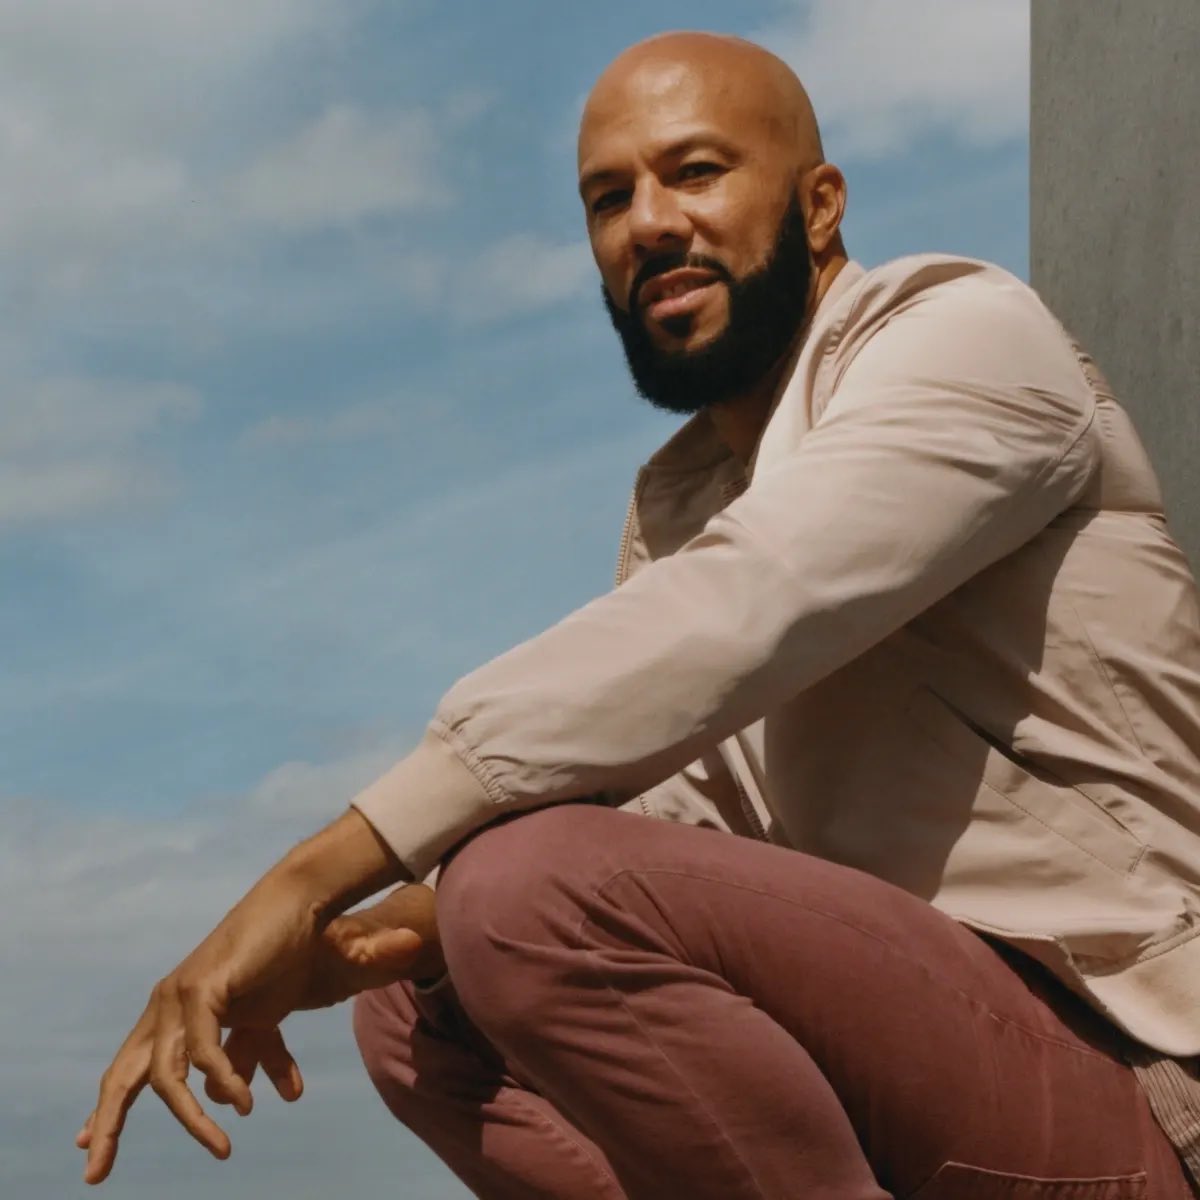 9: CommonI still have never heard a song from Common that I didn’t enjoy. His calm delivery and laid back beats provide some of my favorite music to listen to when I just want to relax.